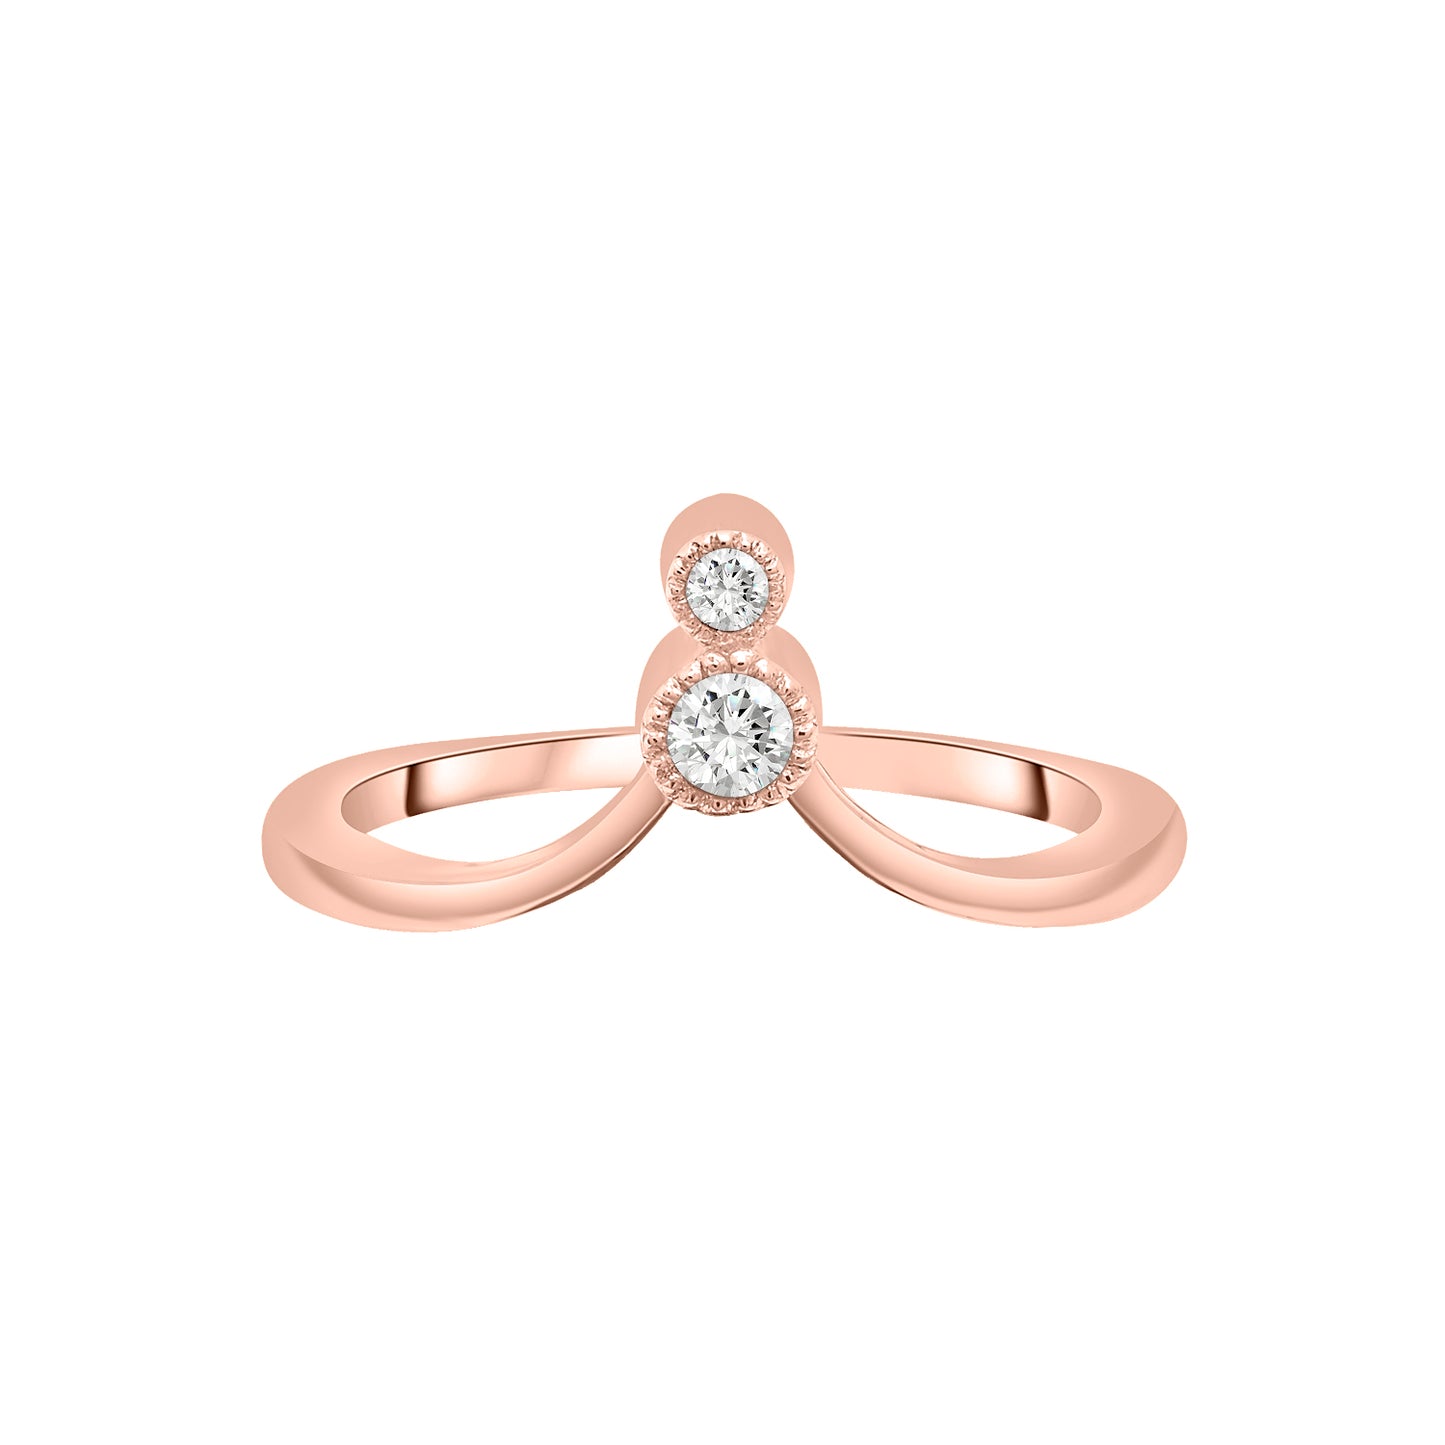 Heluviee Arched Diamond Ring In Rose Gold